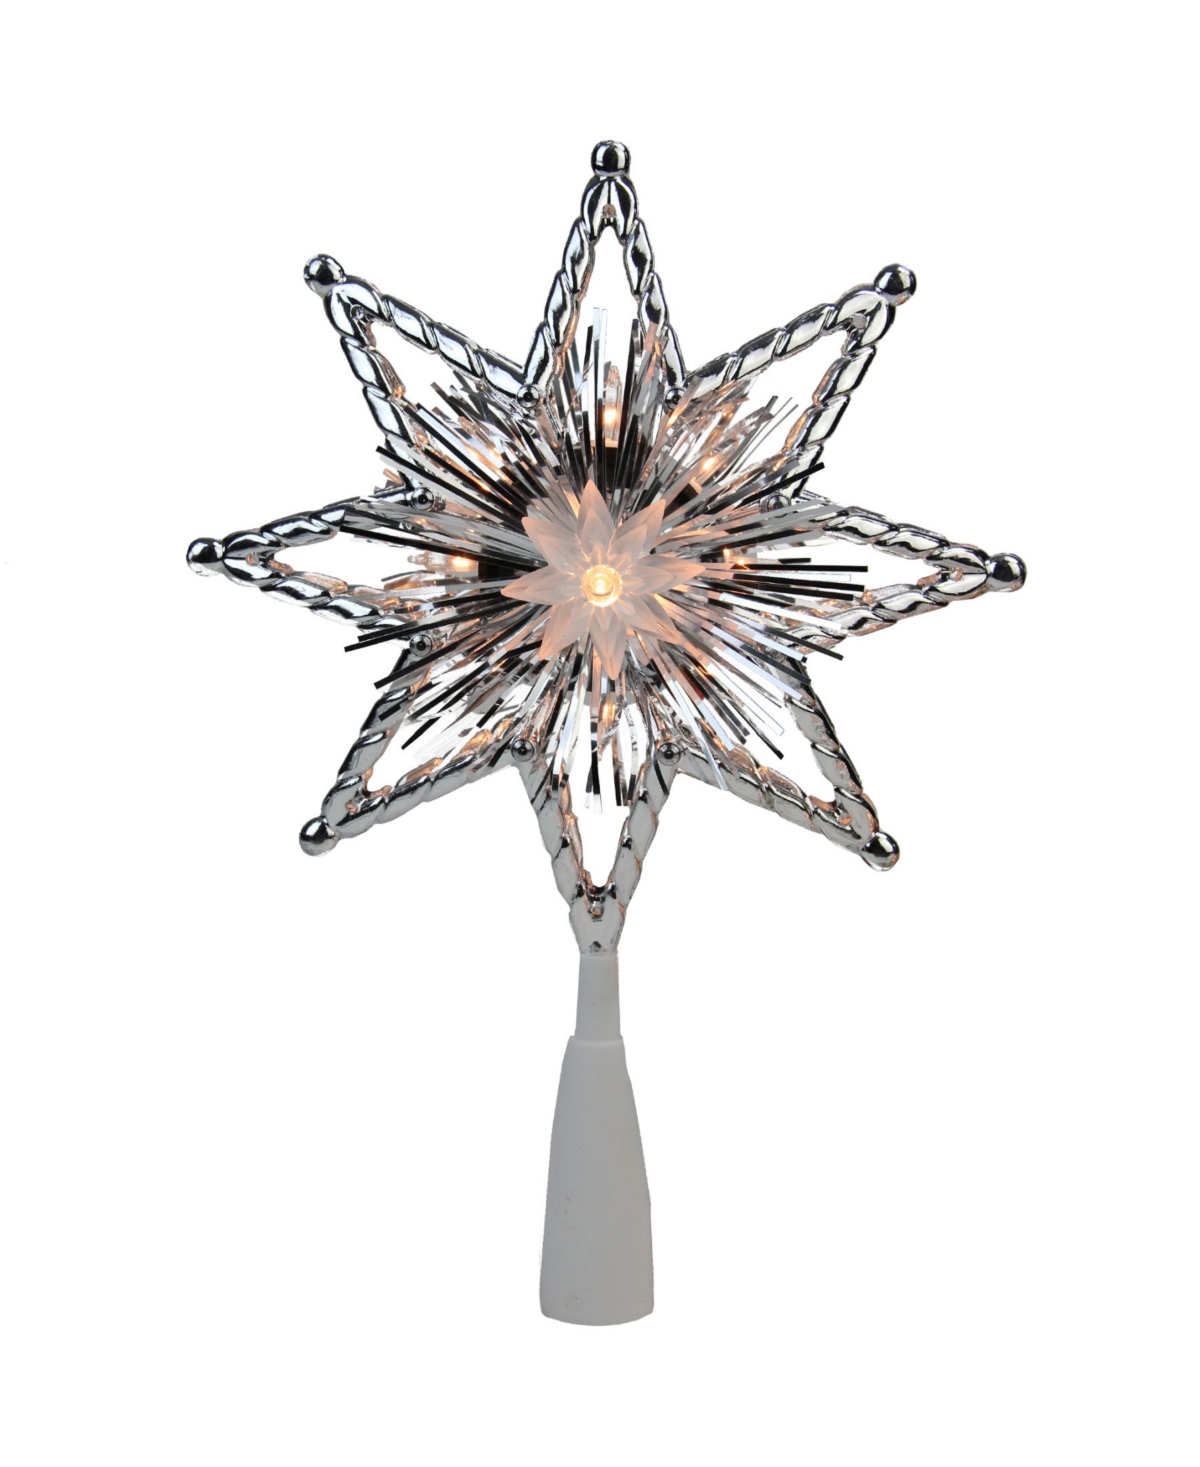 8" Retro Silver Tinsel 8-Point Star Christmas Tree Topper - Clear Lights - Silver